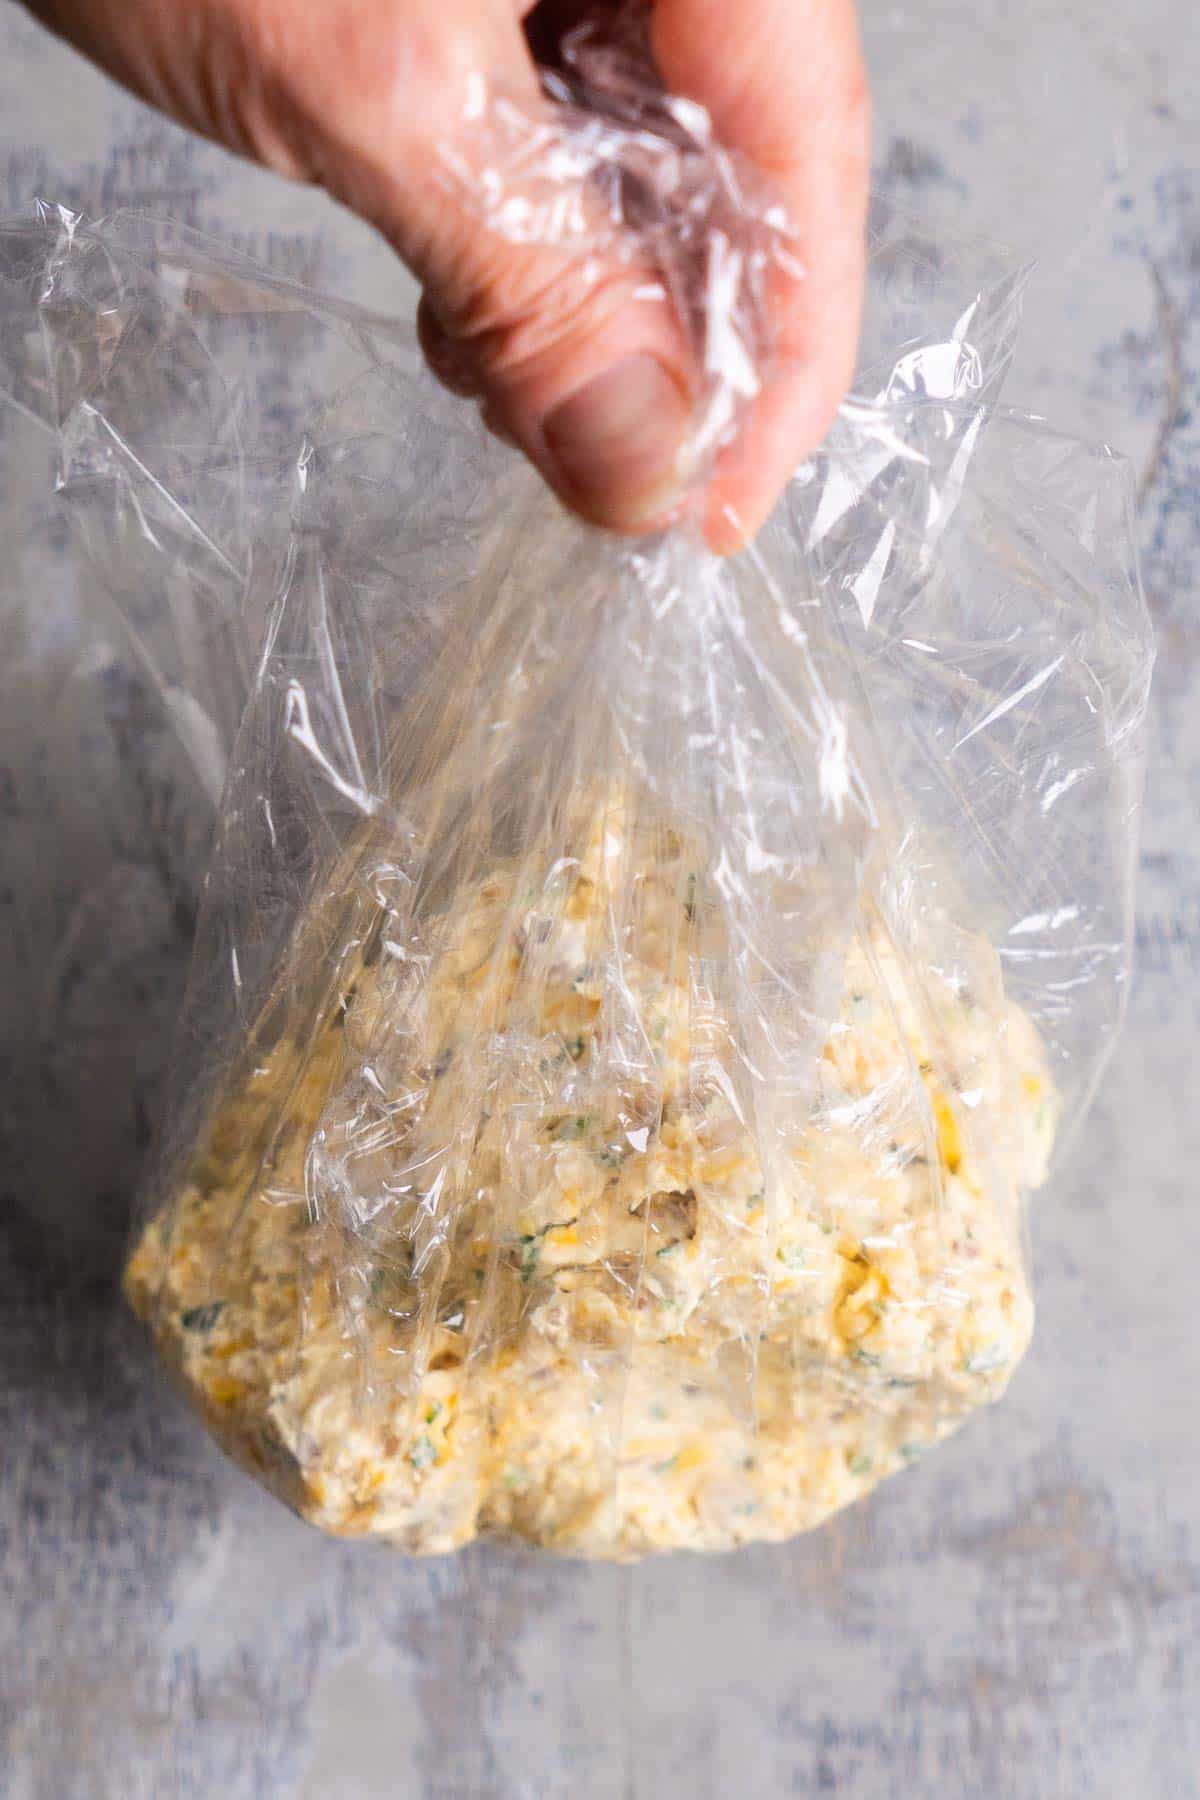 person's hand holds cheese ball in plastic wrap